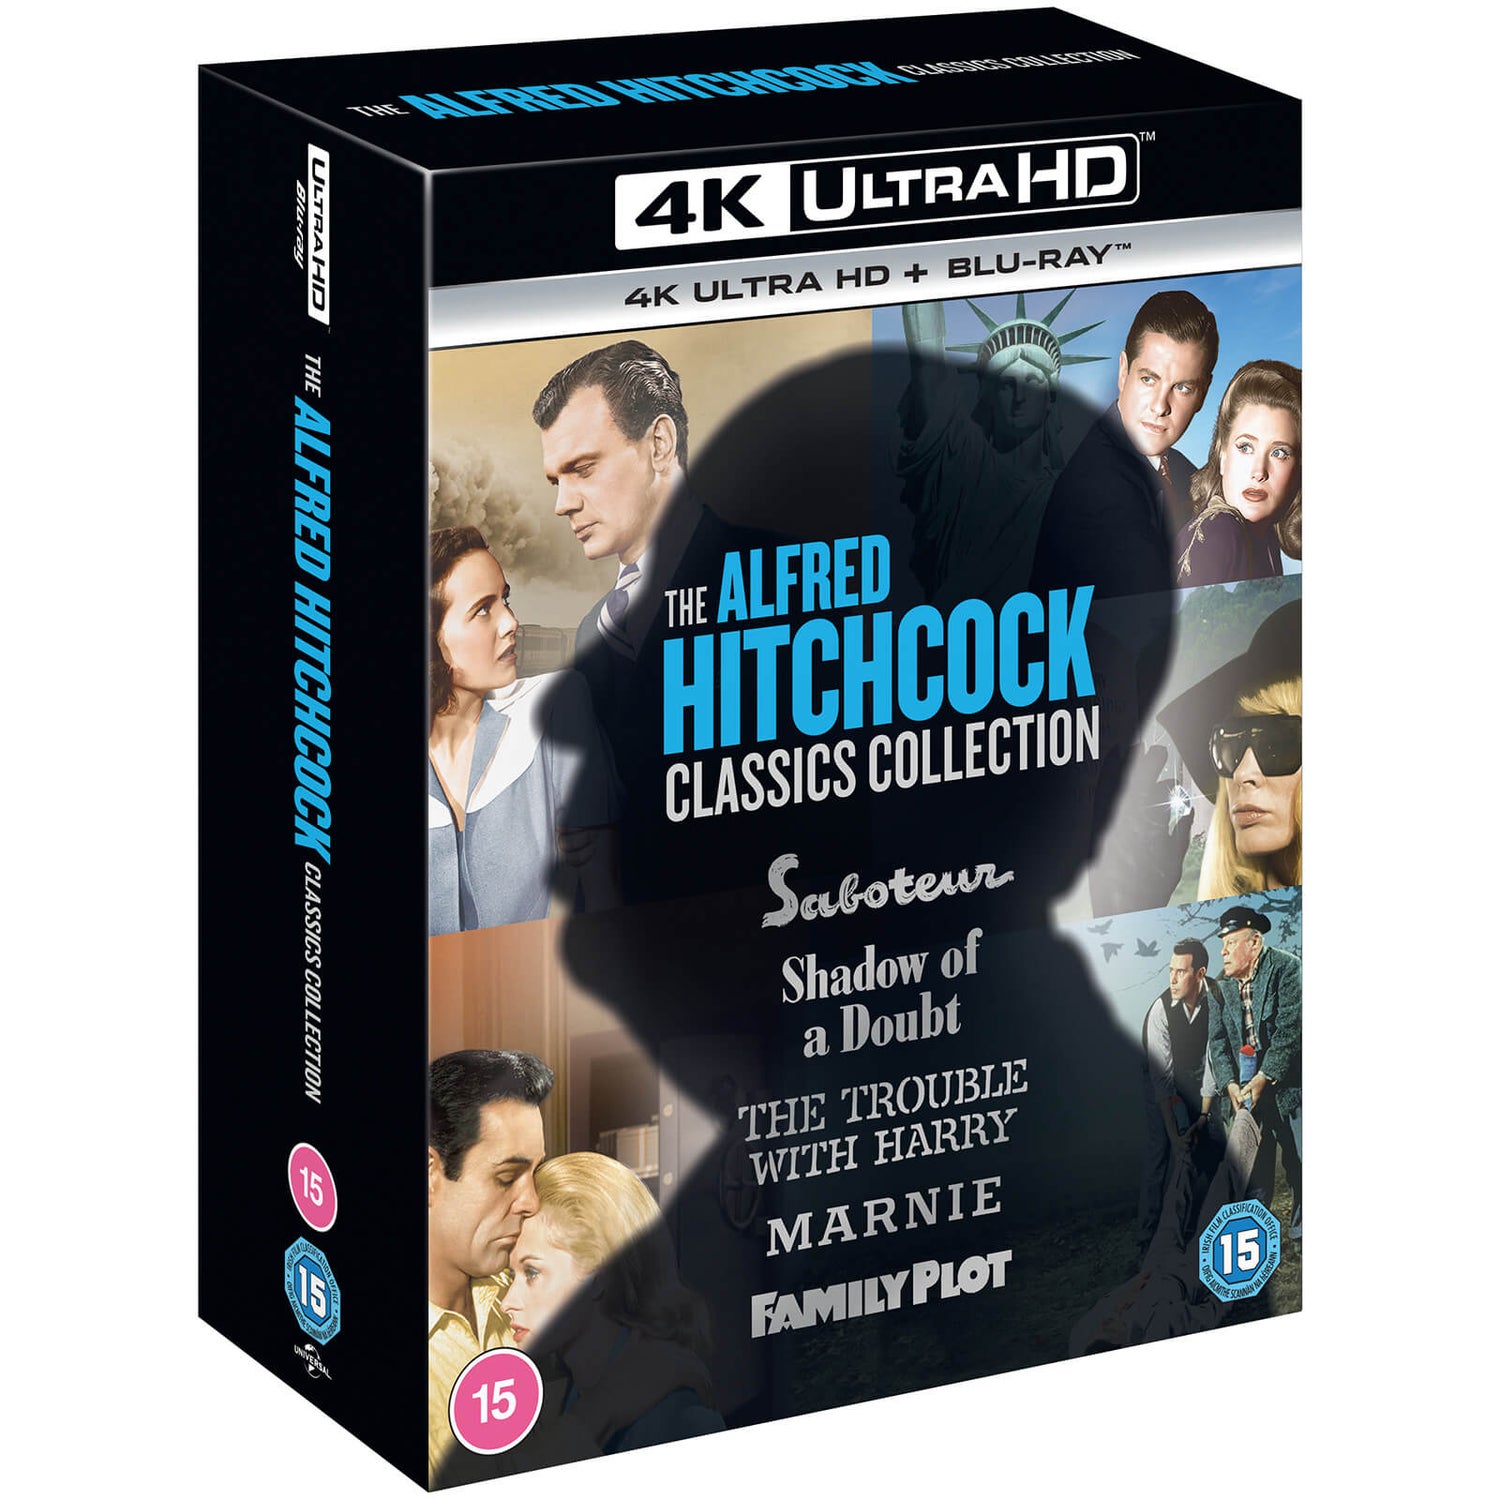 Alfred Hitchcock: Classics Collection Vol. 2 - 4K Ultra HD